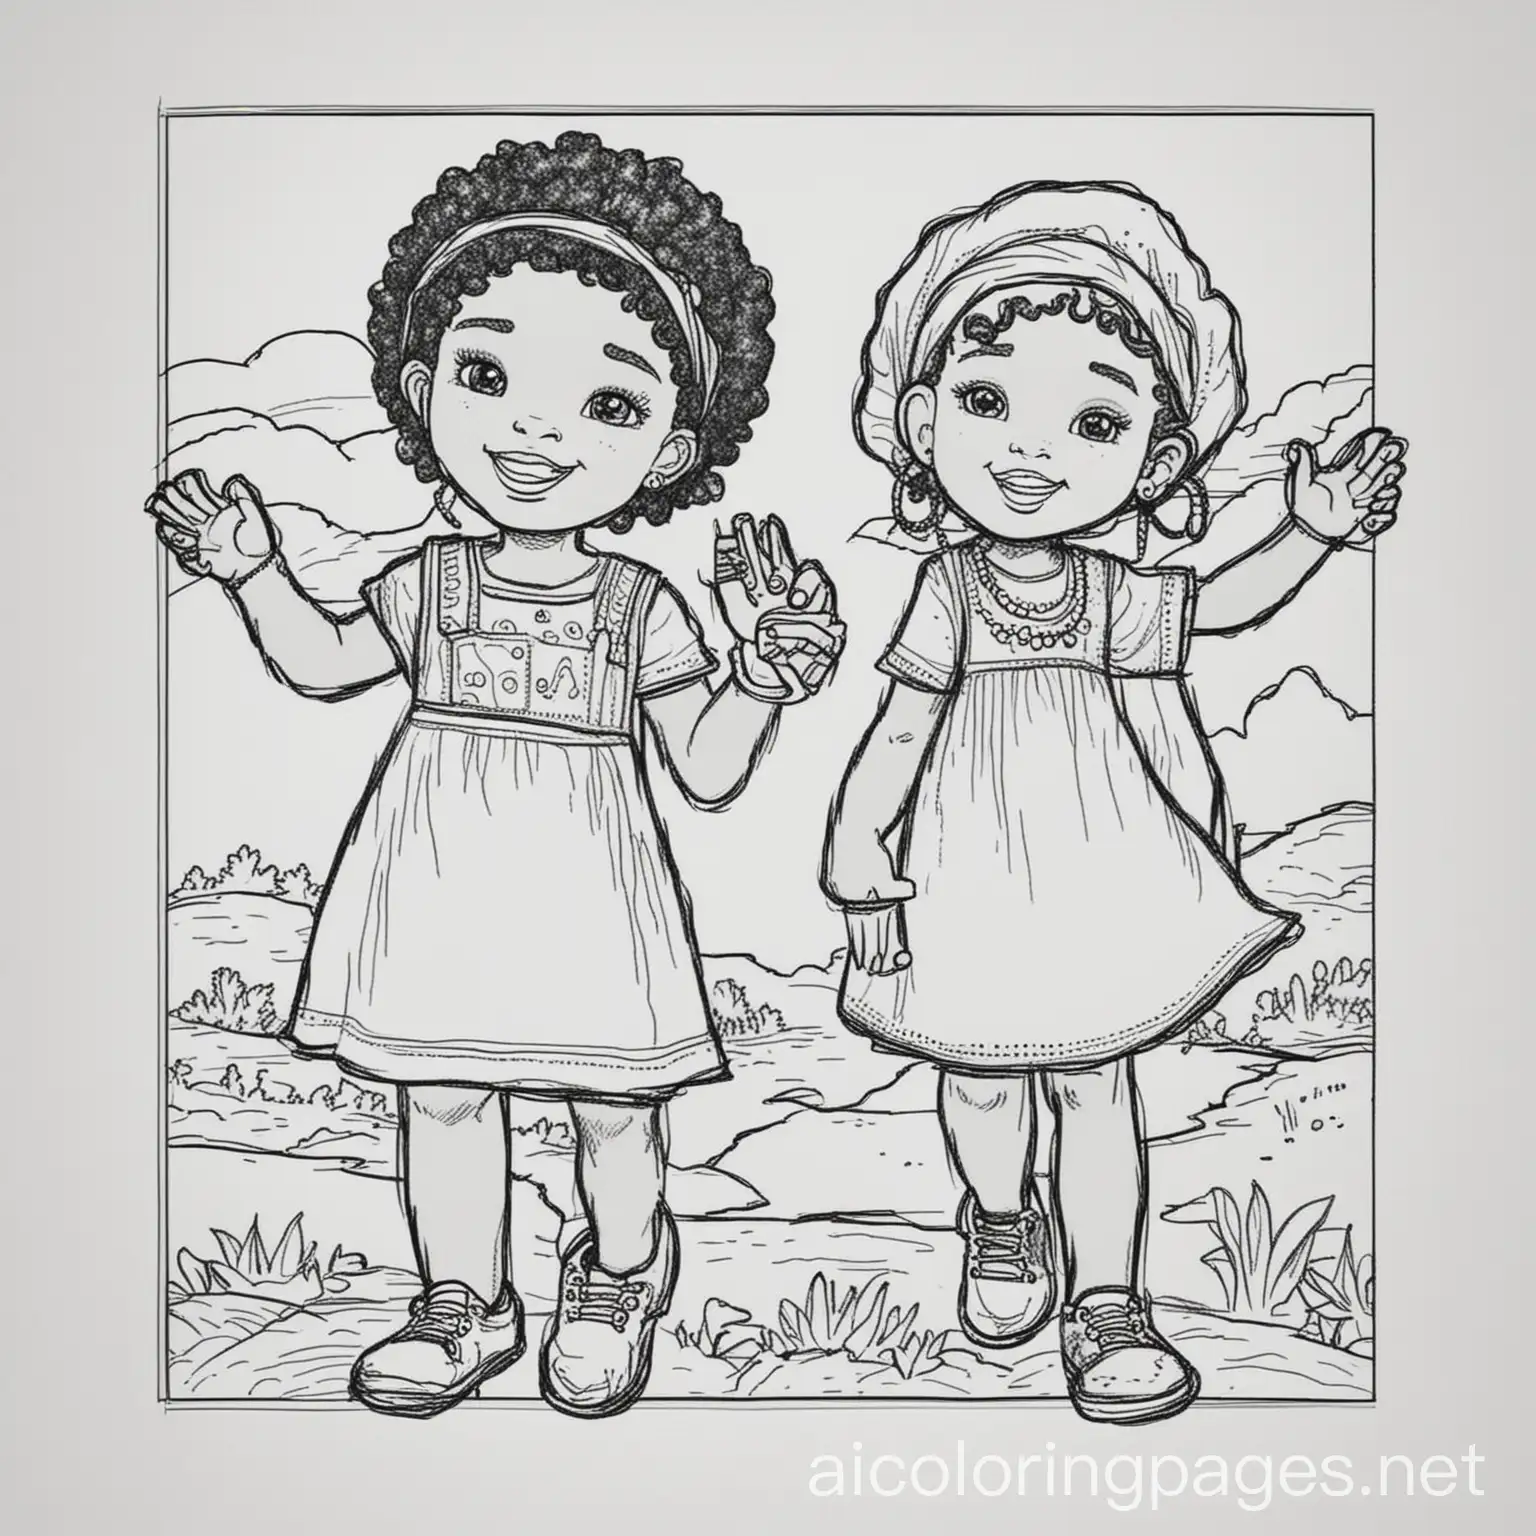 2 africian american children celebrating juneteenth outline, Coloring Page, black and white, line art, white background, Simplicity, Ample White Space. The background of the coloring page is plain white to make it easy for young children to color within the lines. The outlines of all the subjects are easy to distinguish, making it simple for kids to color without too much difficulty, Coloring Page, black and white, line art, white background, Simplicity, Ample White Space. The background of the coloring page is plain white to make it easy for young children to color within the lines. The outlines of all the subjects are easy to distinguish, making it simple for kids to color without too much difficulty